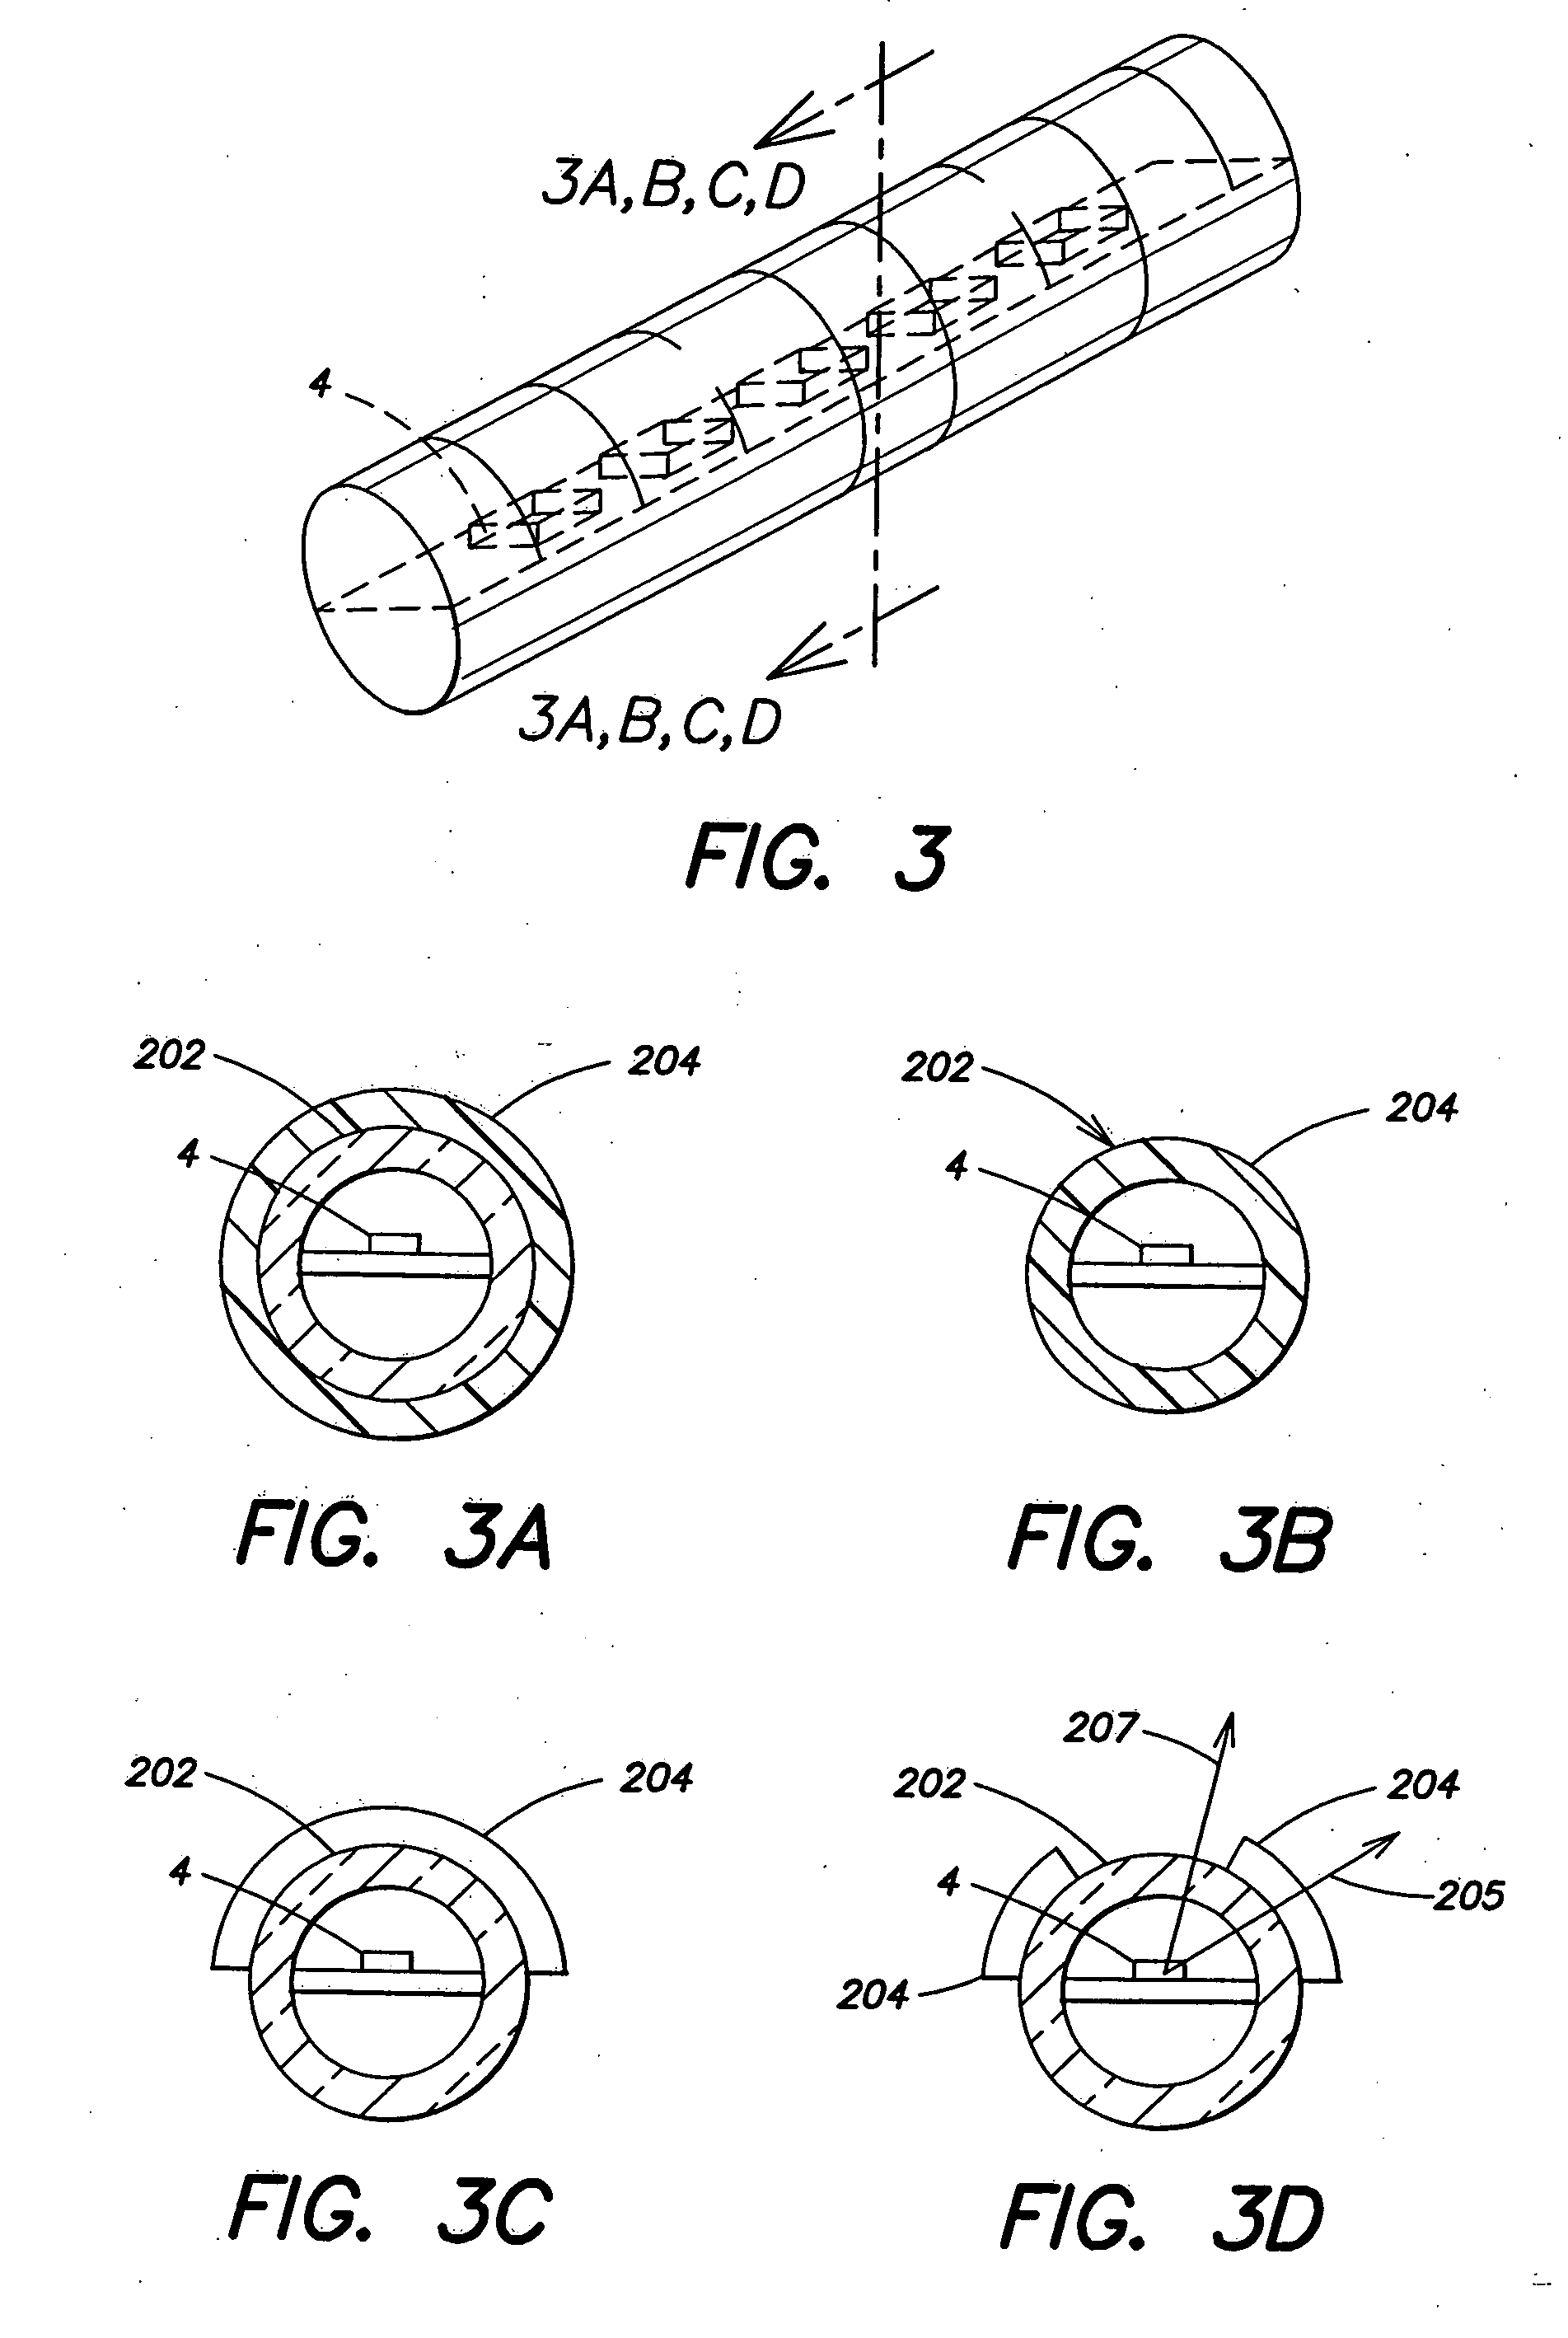 Systems and methods for converting illumination